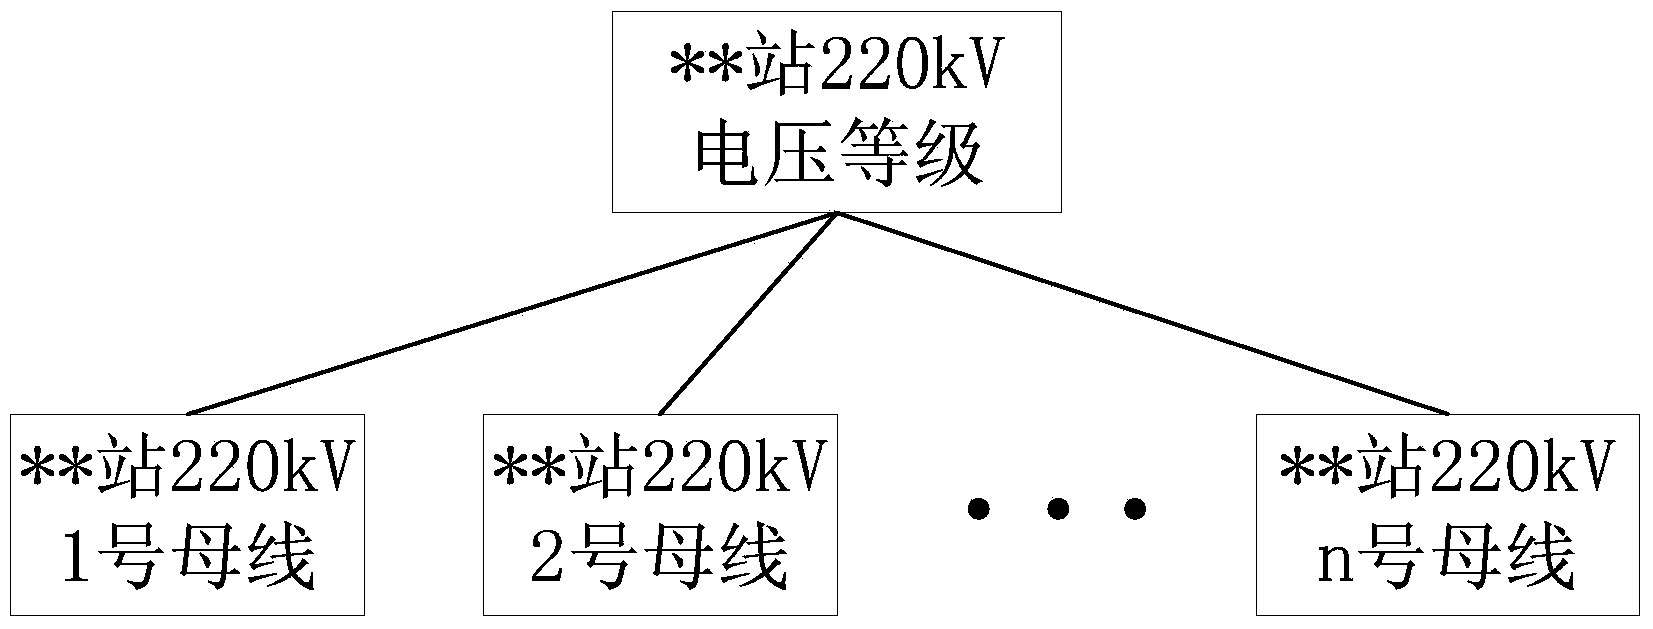 Voltage alarm method used for buses of main electric network